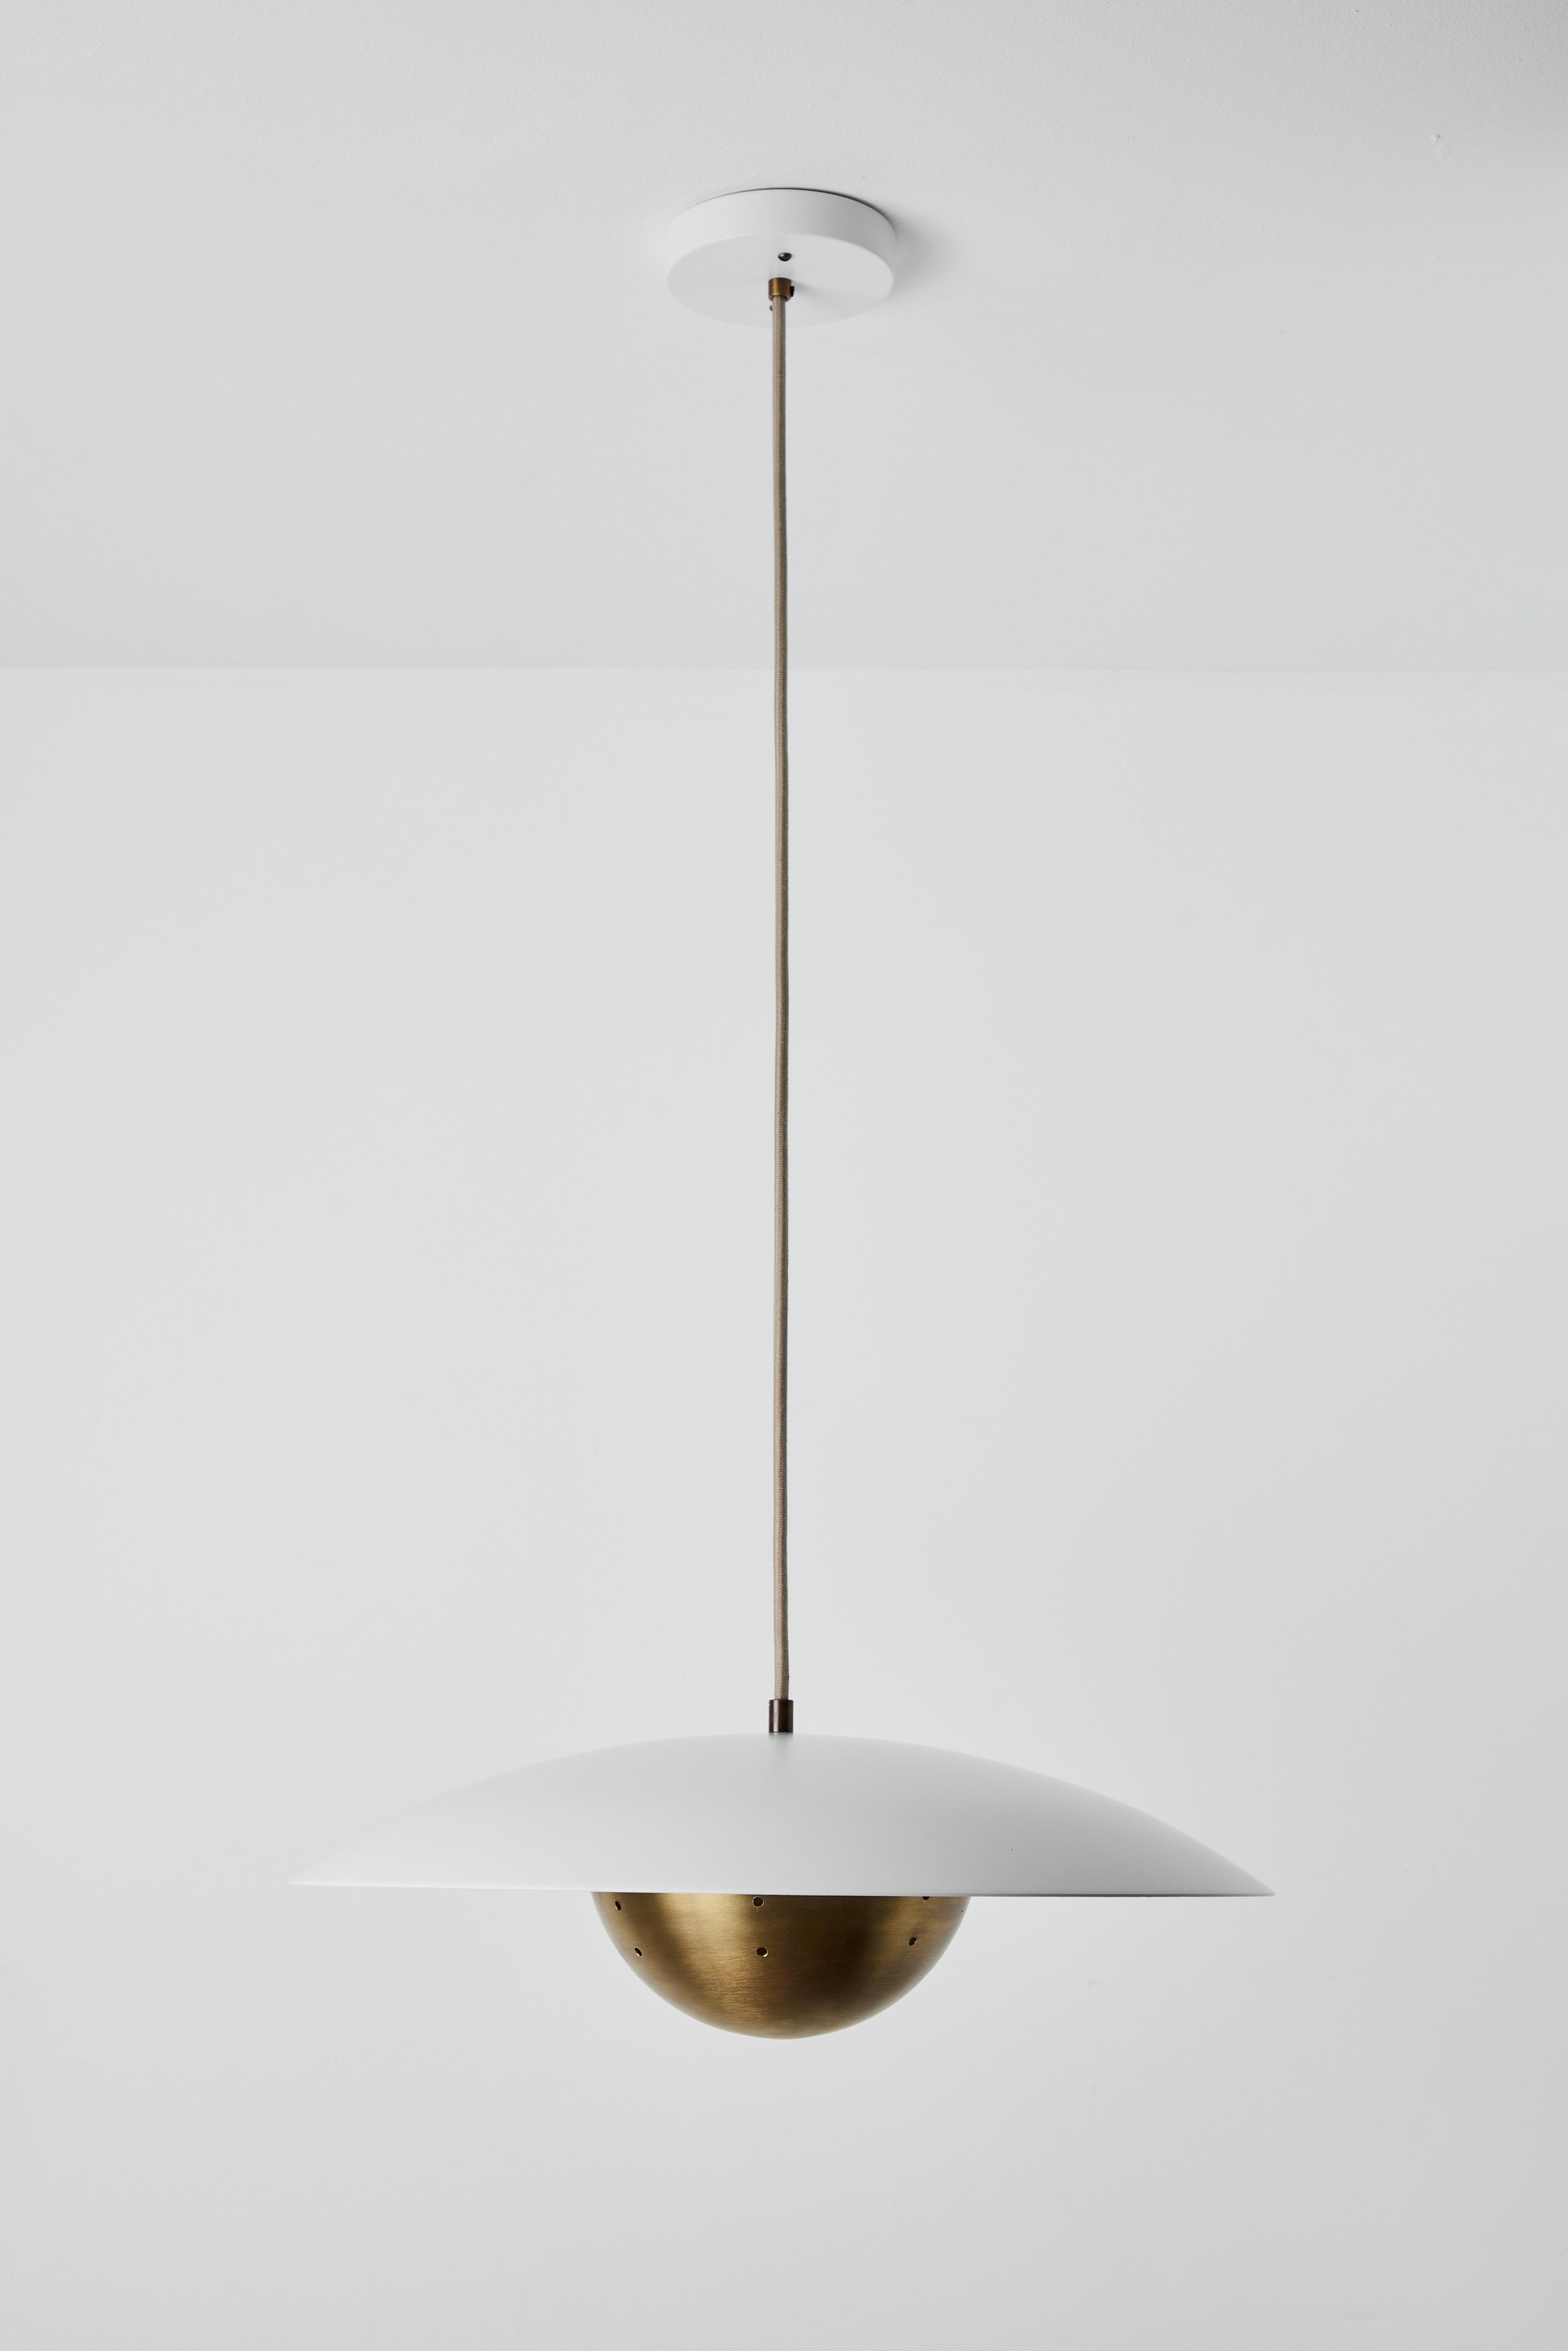 'Gabi' Perforated Brass Dome & White Painted Metal Pendant by Alvaro Benitez For Sale 6